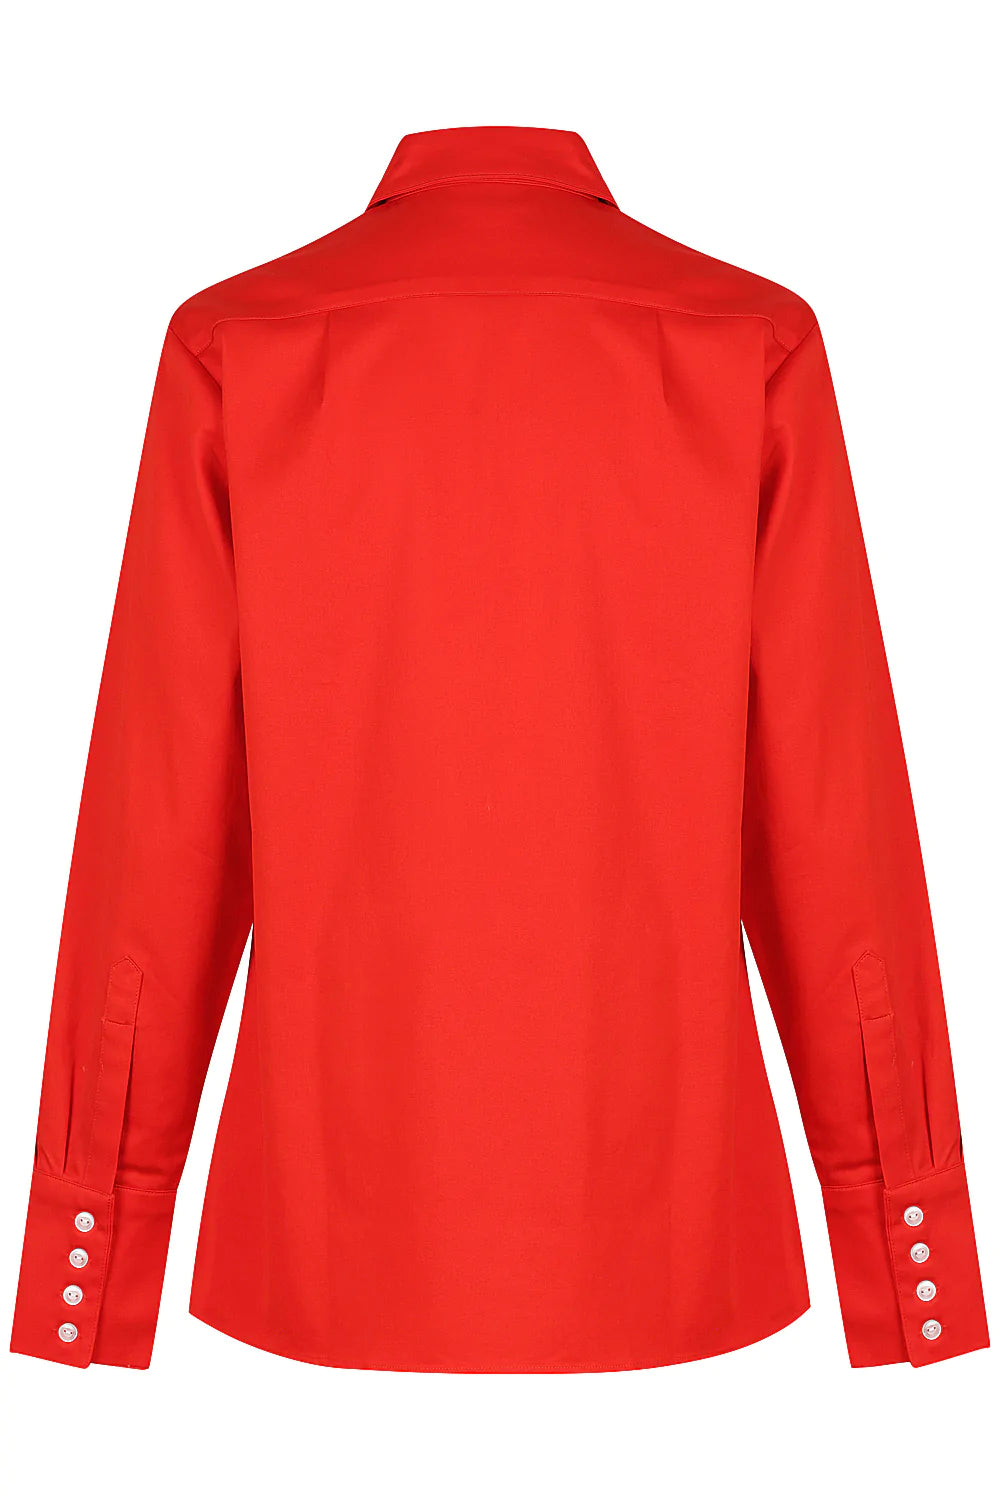 House of Cheri Relaxed Fit Red Shirt